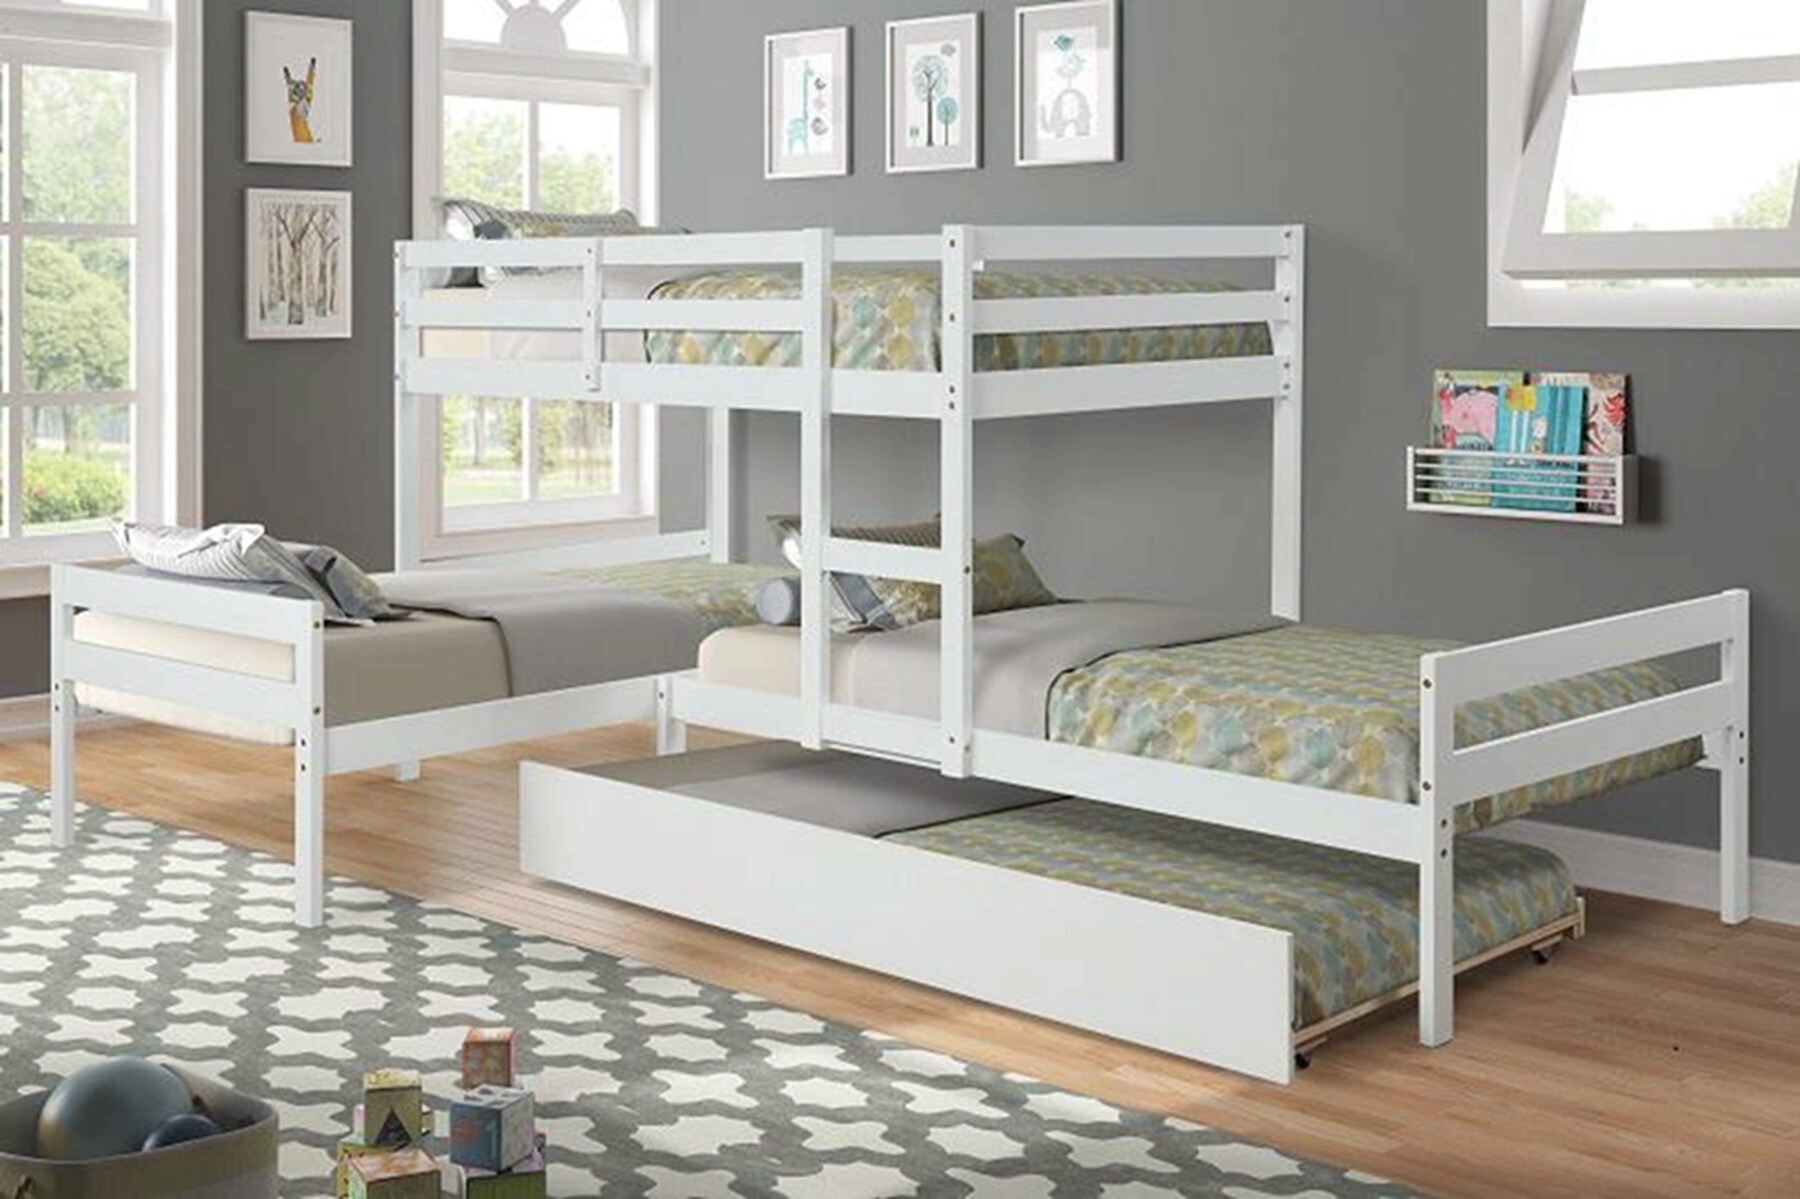 Casainc L Shaped Bunk Bed With Trundle, Twin Bed Frame With Room For Storage Underneath